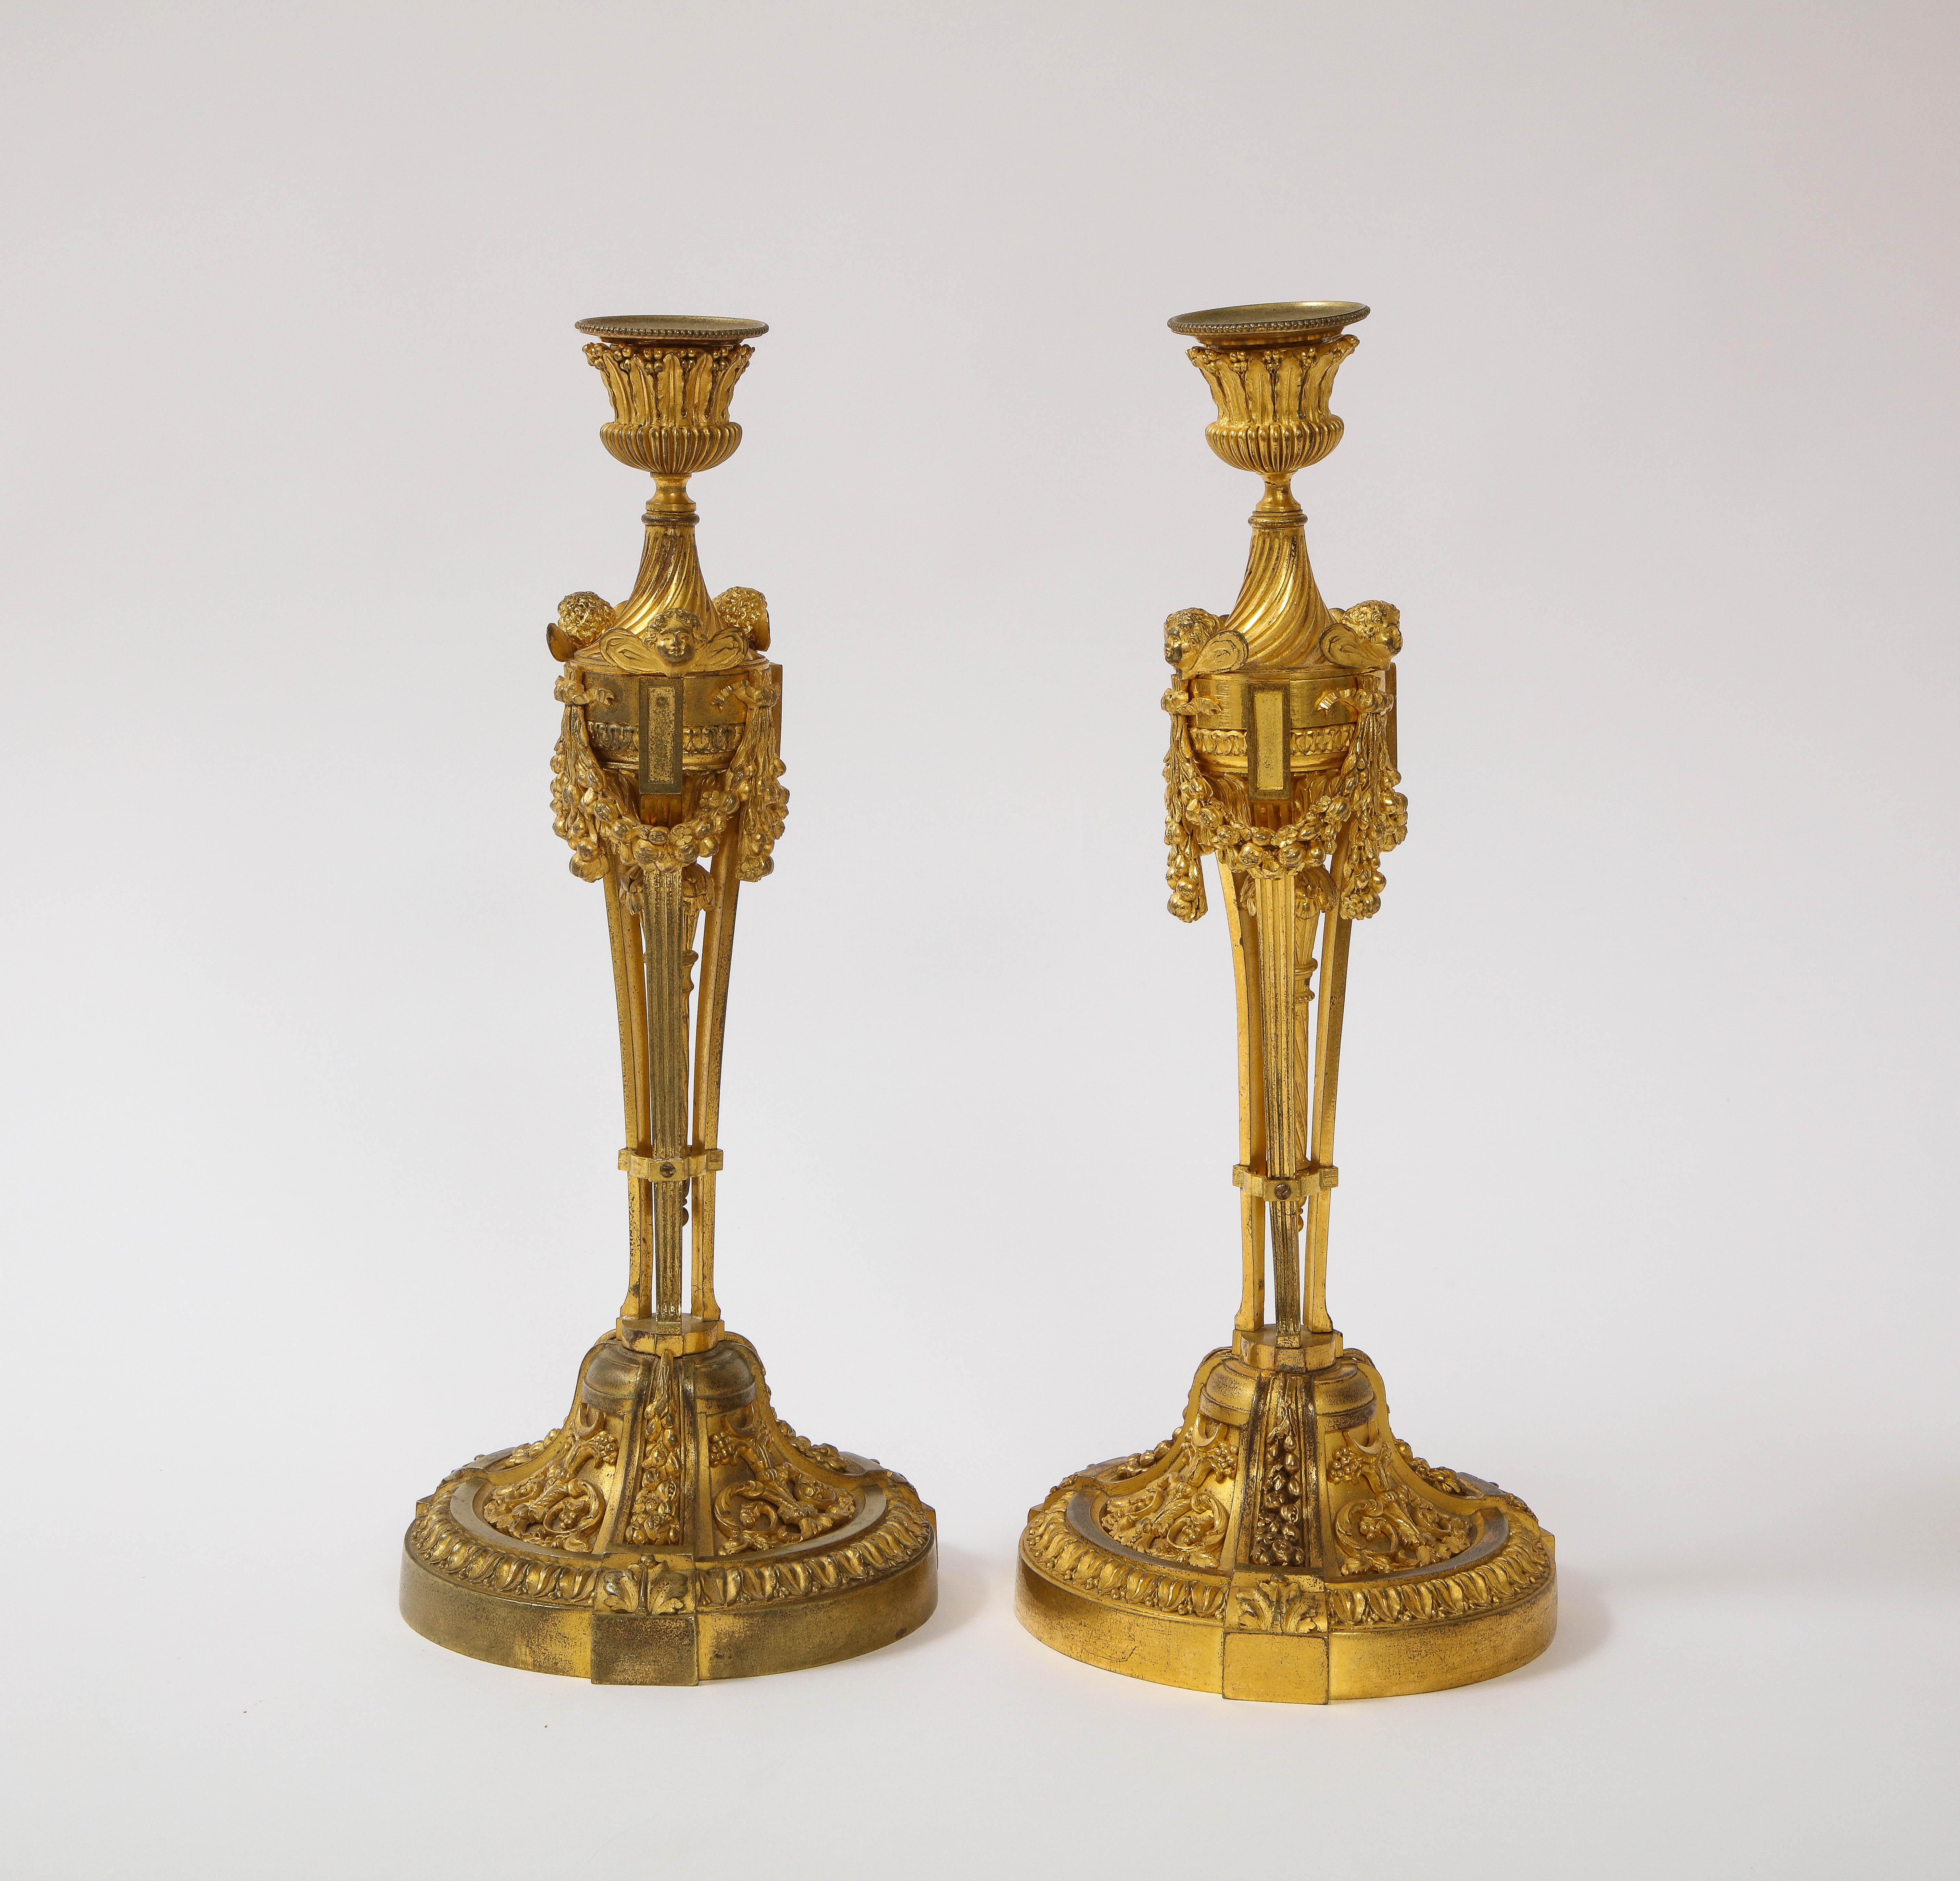 19th Century Pair of French Louid xvi Ormolu Candlesticks with Putti Masks and Garlands For Sale